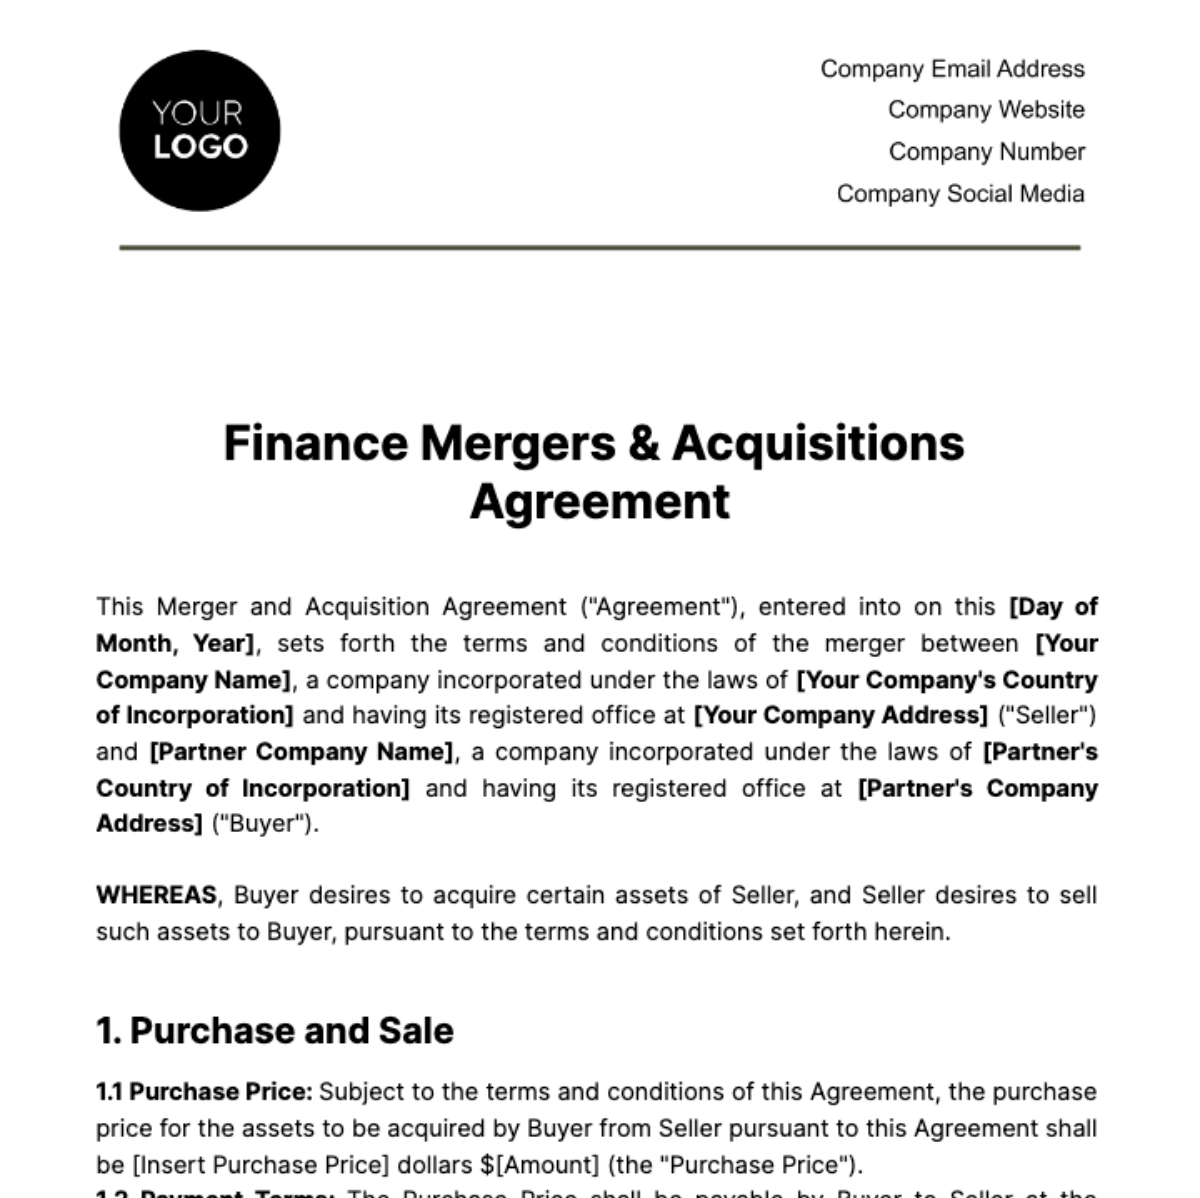 Free Finance Mergers & Acquisitions Agreement Template